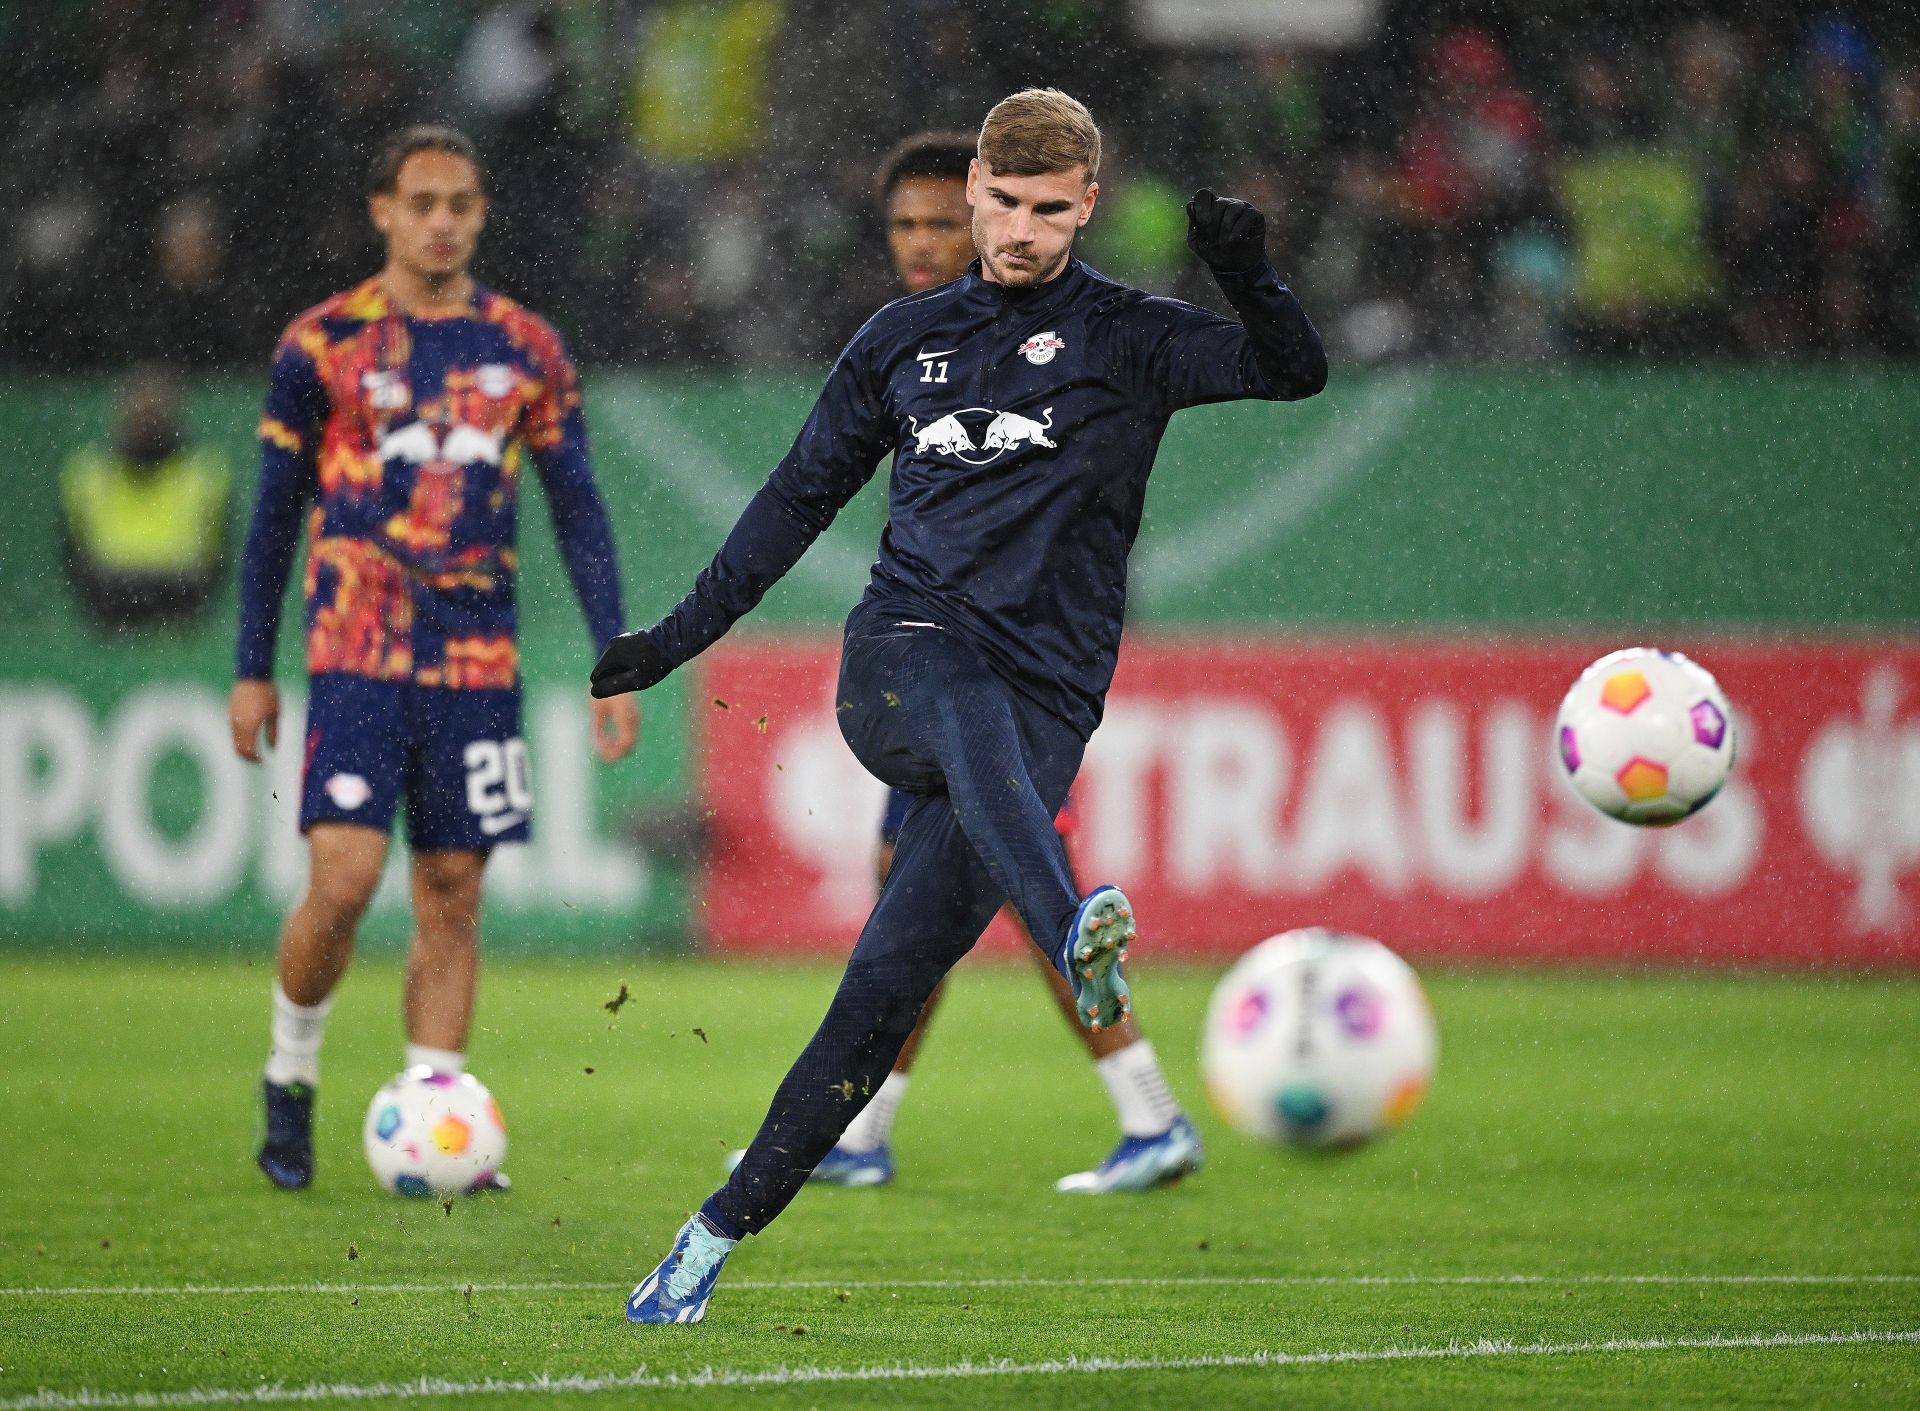 Timo Werner is not a target at Old Trafford